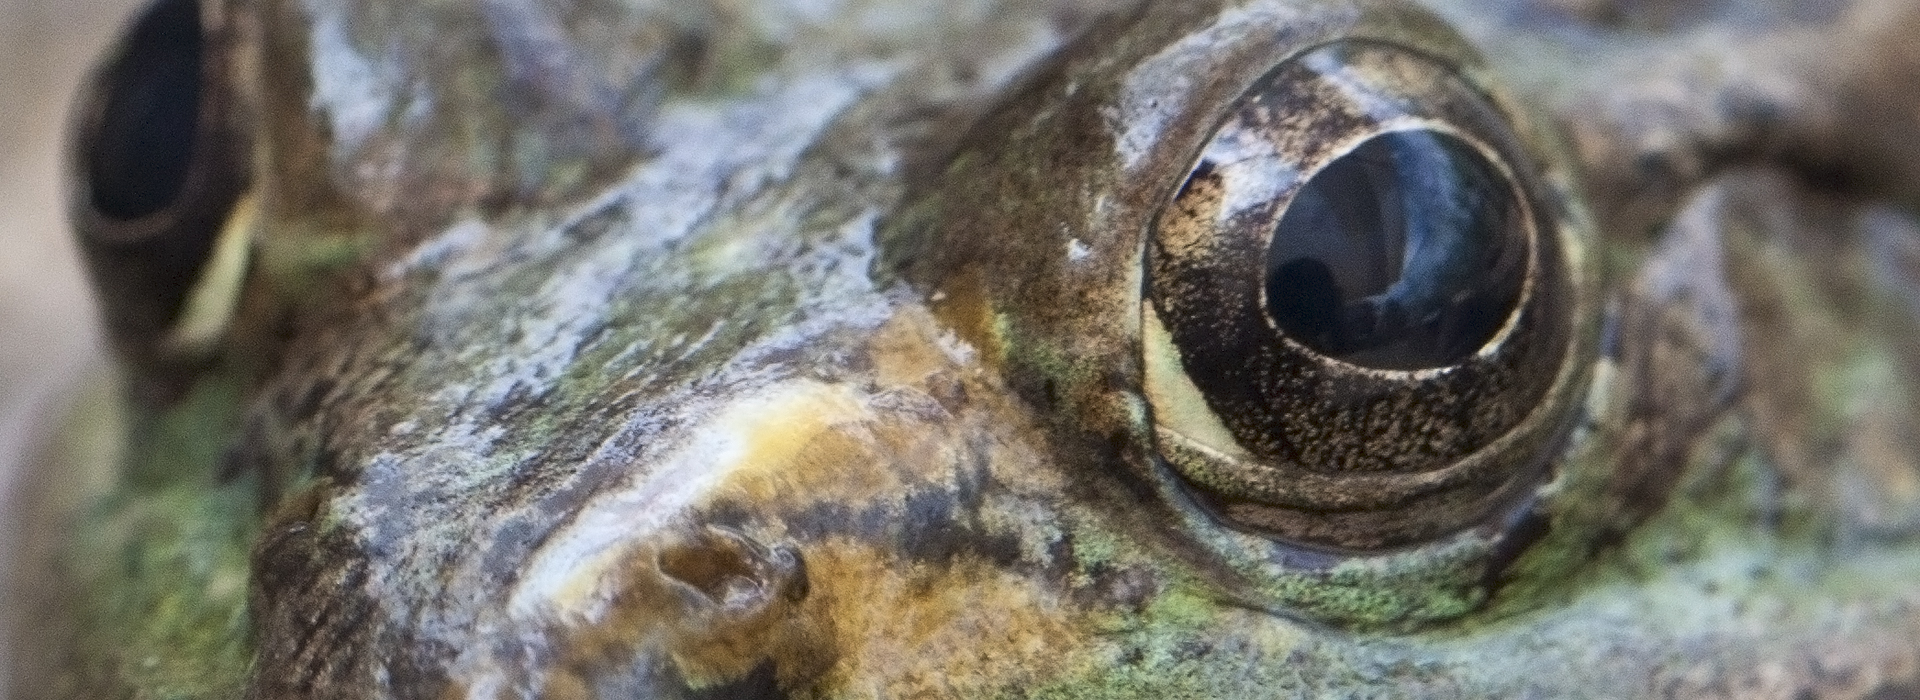 Leopard Frog at the Life on the Rocks exhibit, Arizona-Sonora Desert Museum. The camera and photographer are reflected in the frog's eye